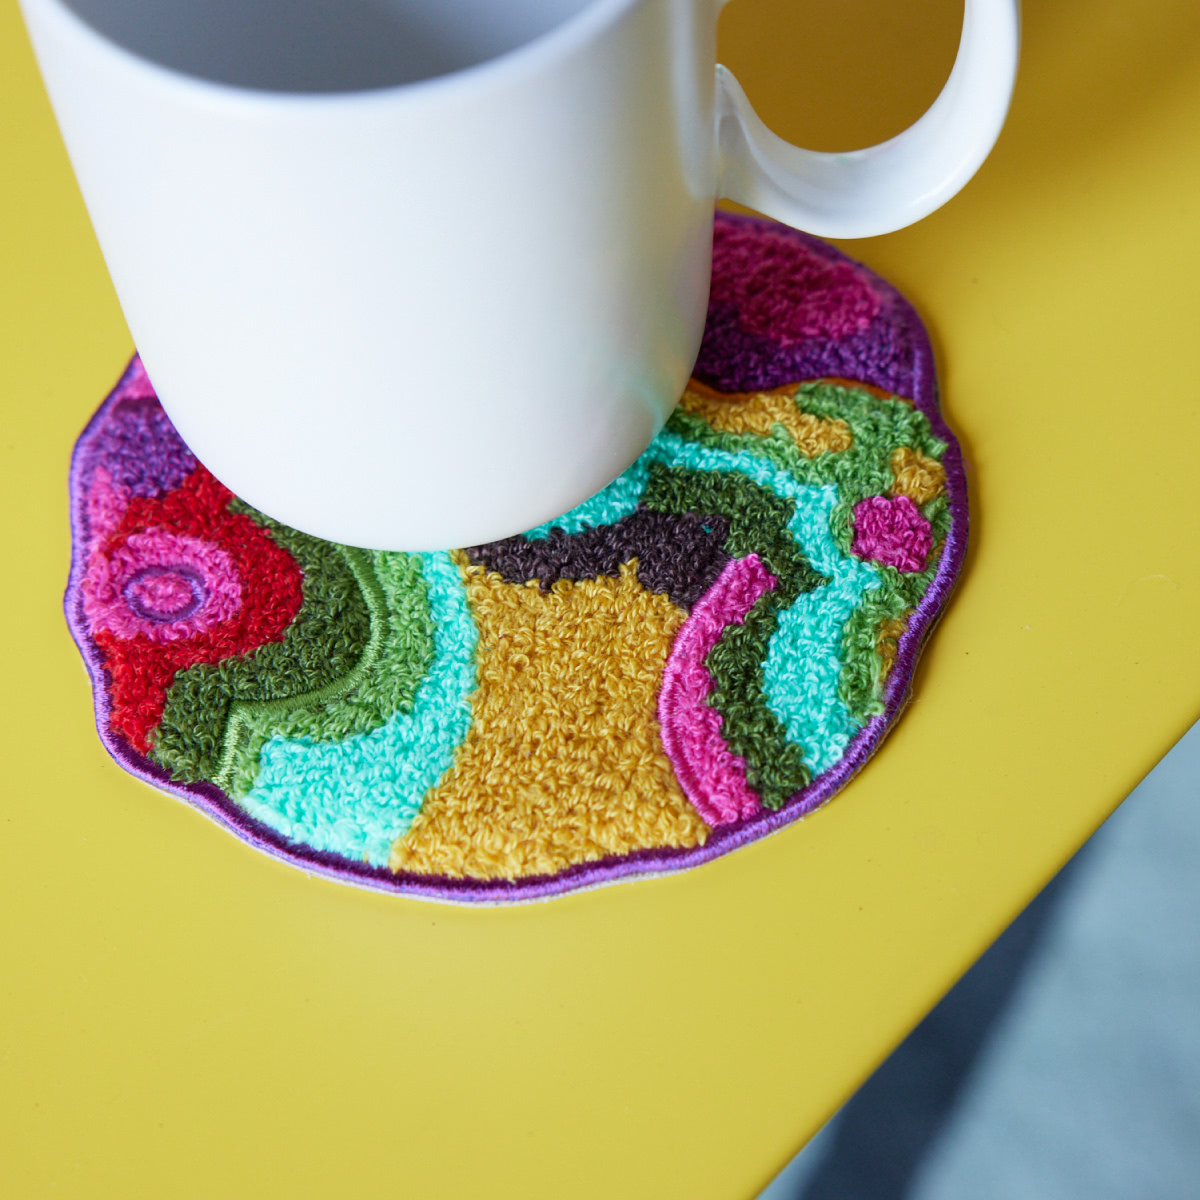 A white mug rests on a miniature rug called Mini Oasis, in Garden color way by Angela Adams.